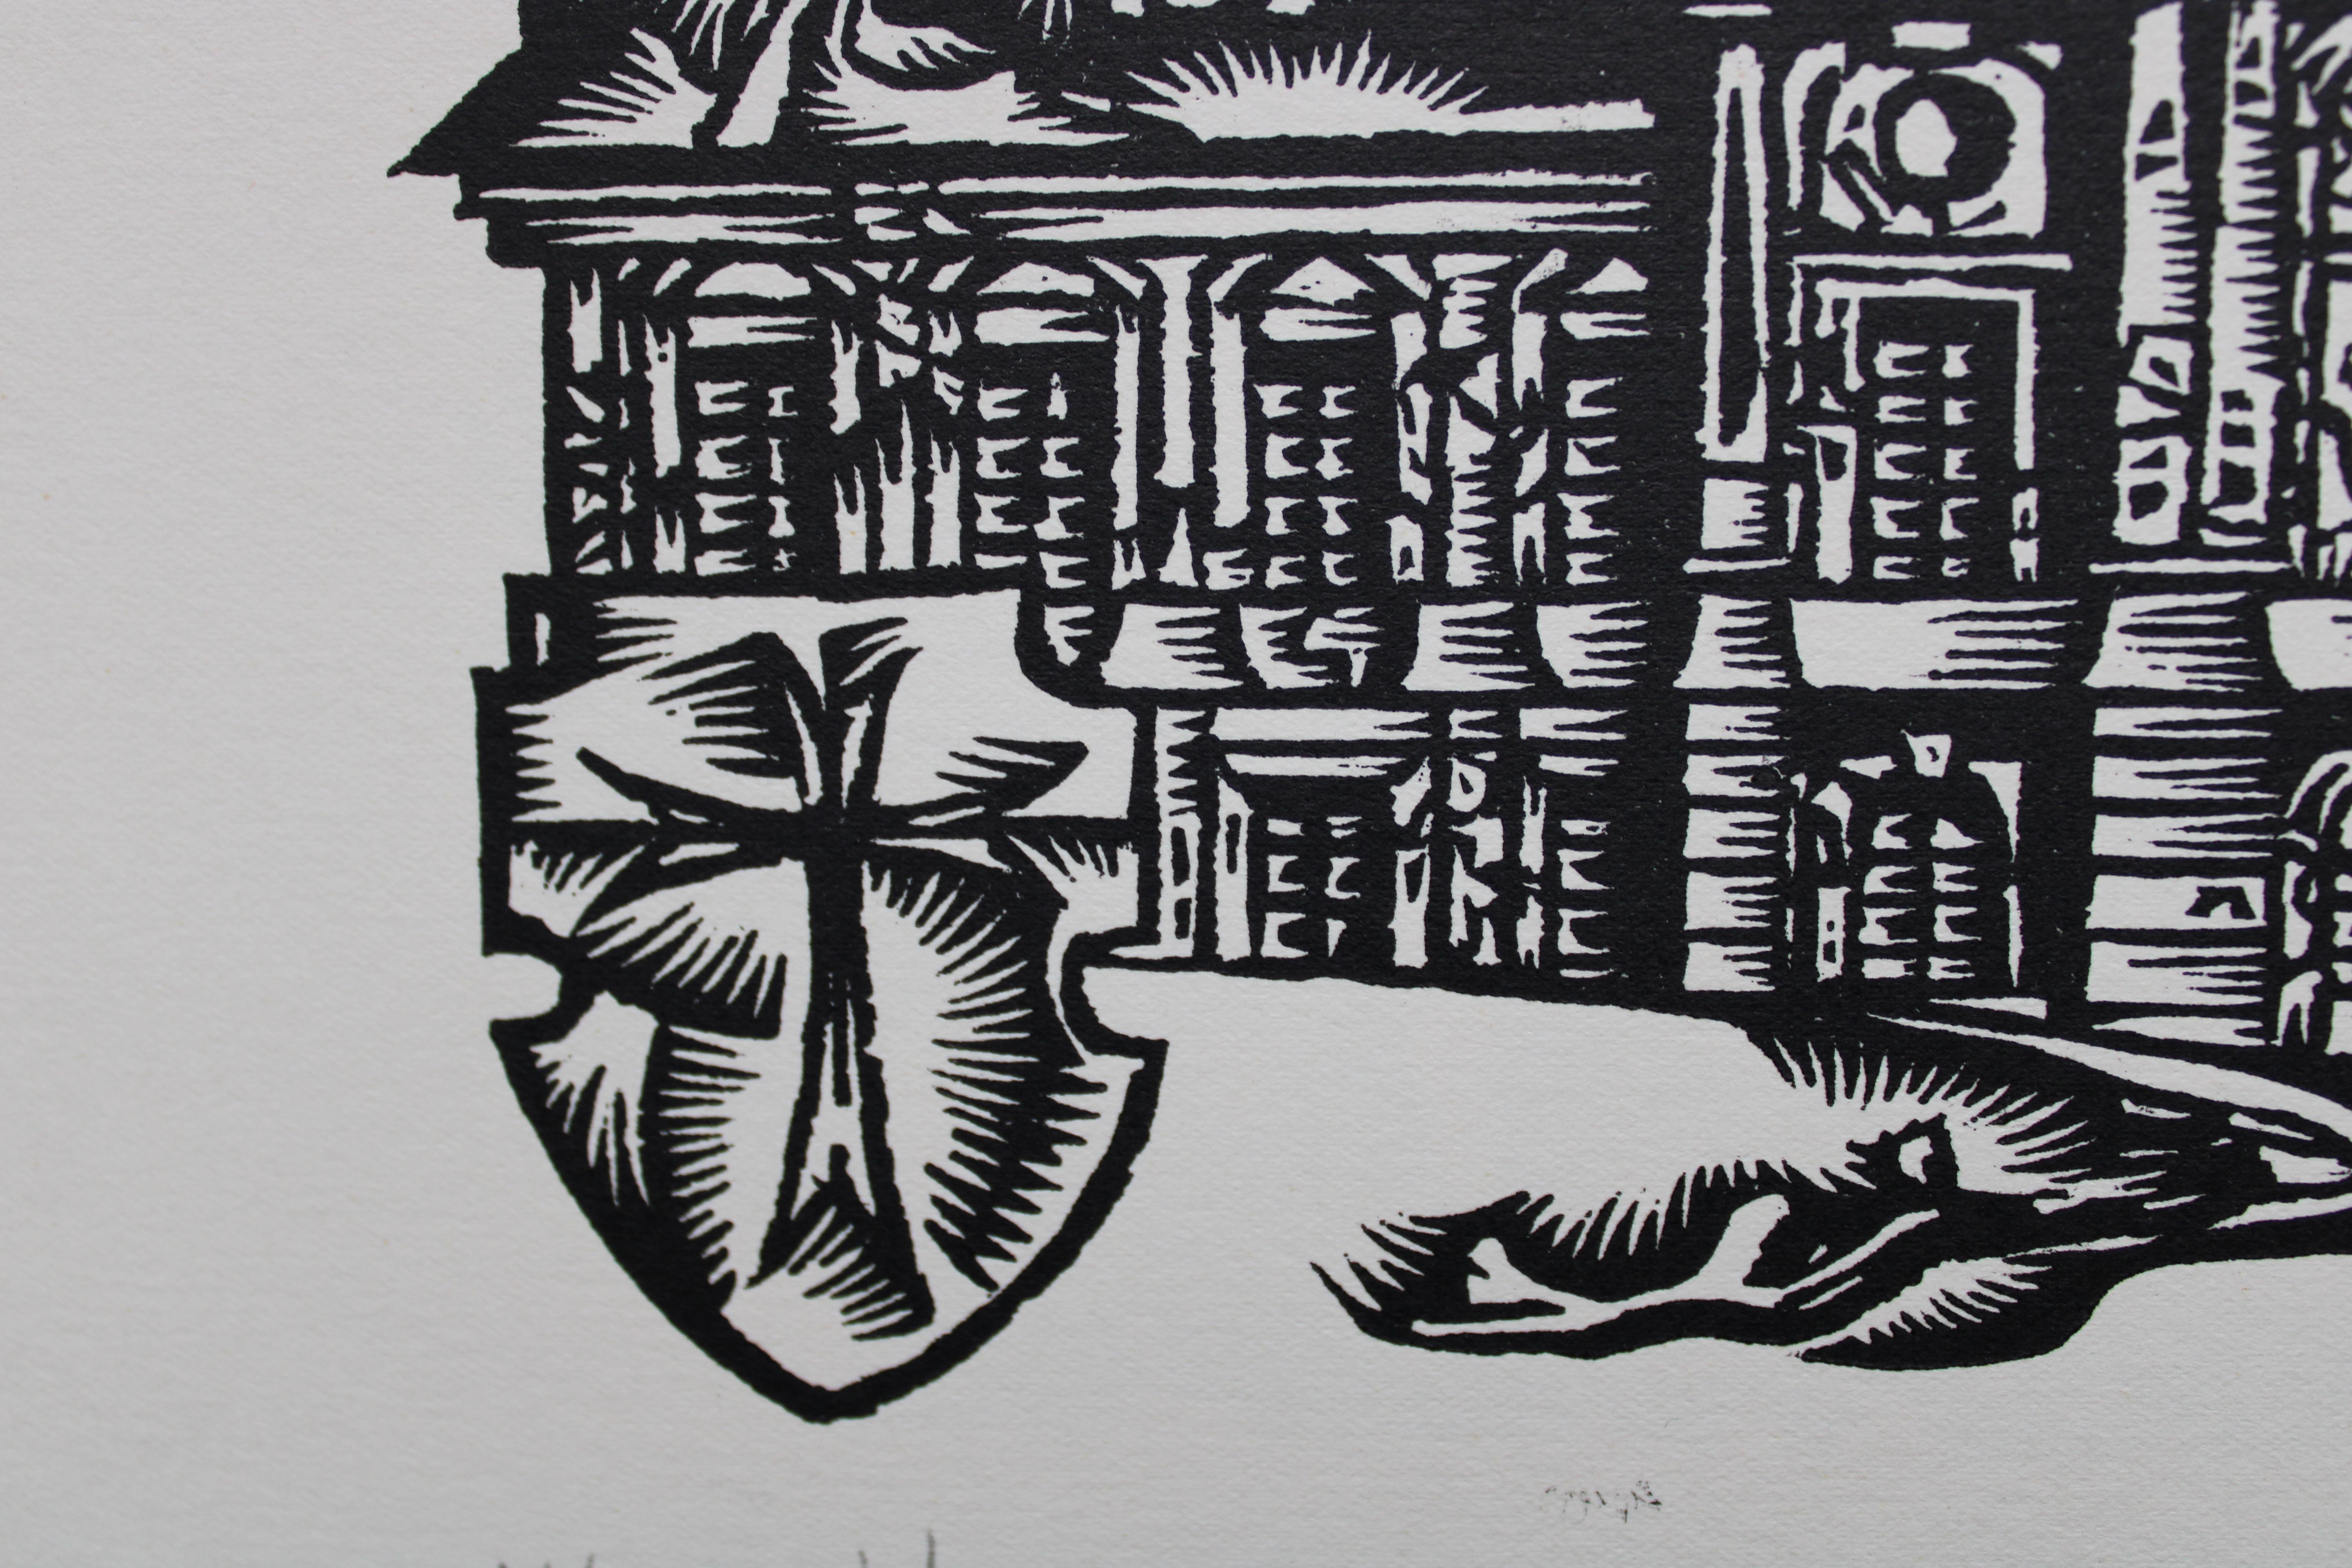 In slavery to the lord and manor. 1982. Paper, linocut, 25x34 cm - Print by Dainis Rozkalns